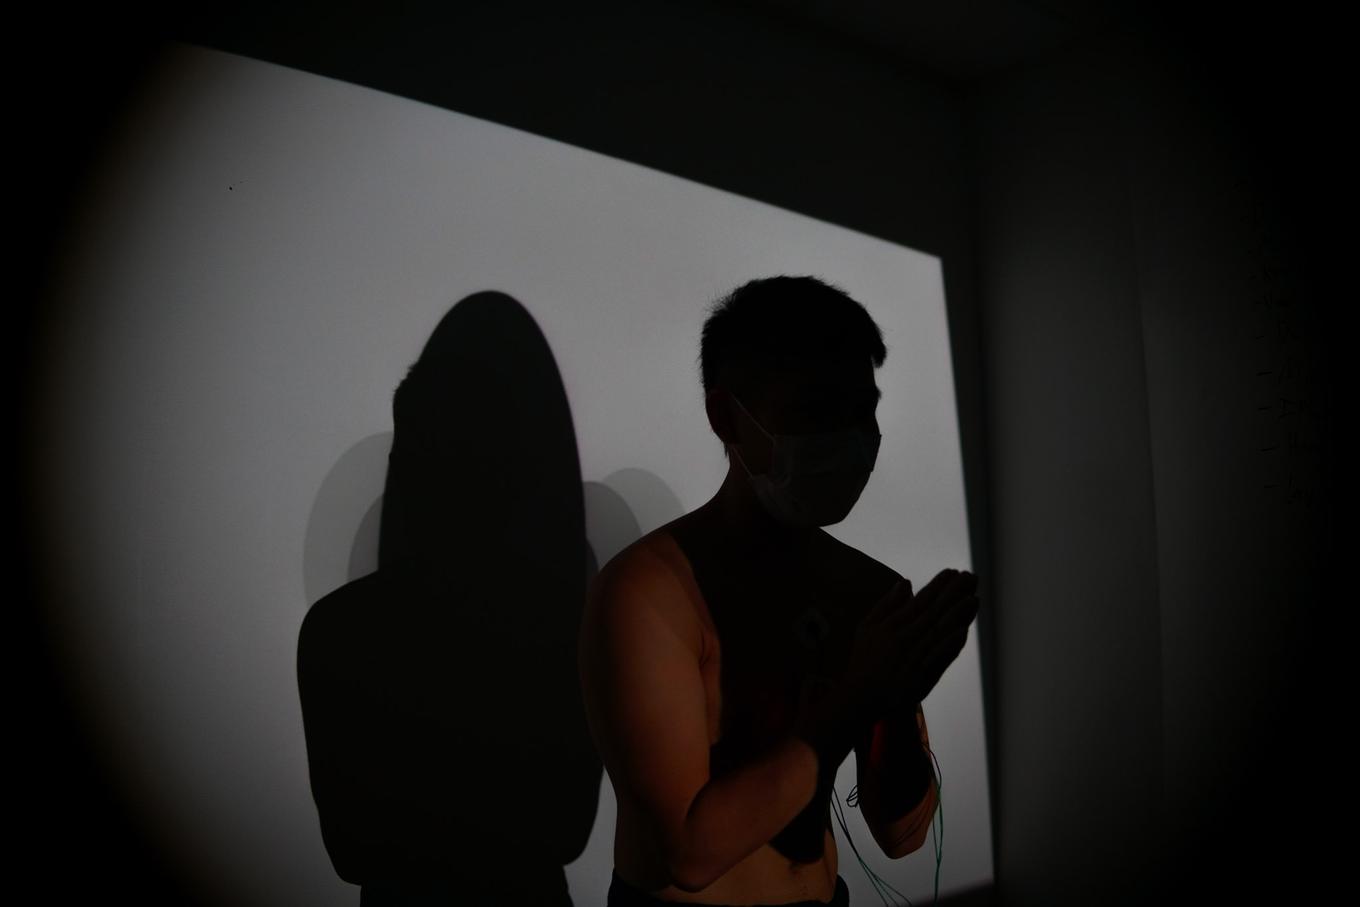 Silhouette of a dancer (Spencer), with hands clasped, facing 3/4 towards the camera. Spencer is in darkness, surrounded by a light background of projected light